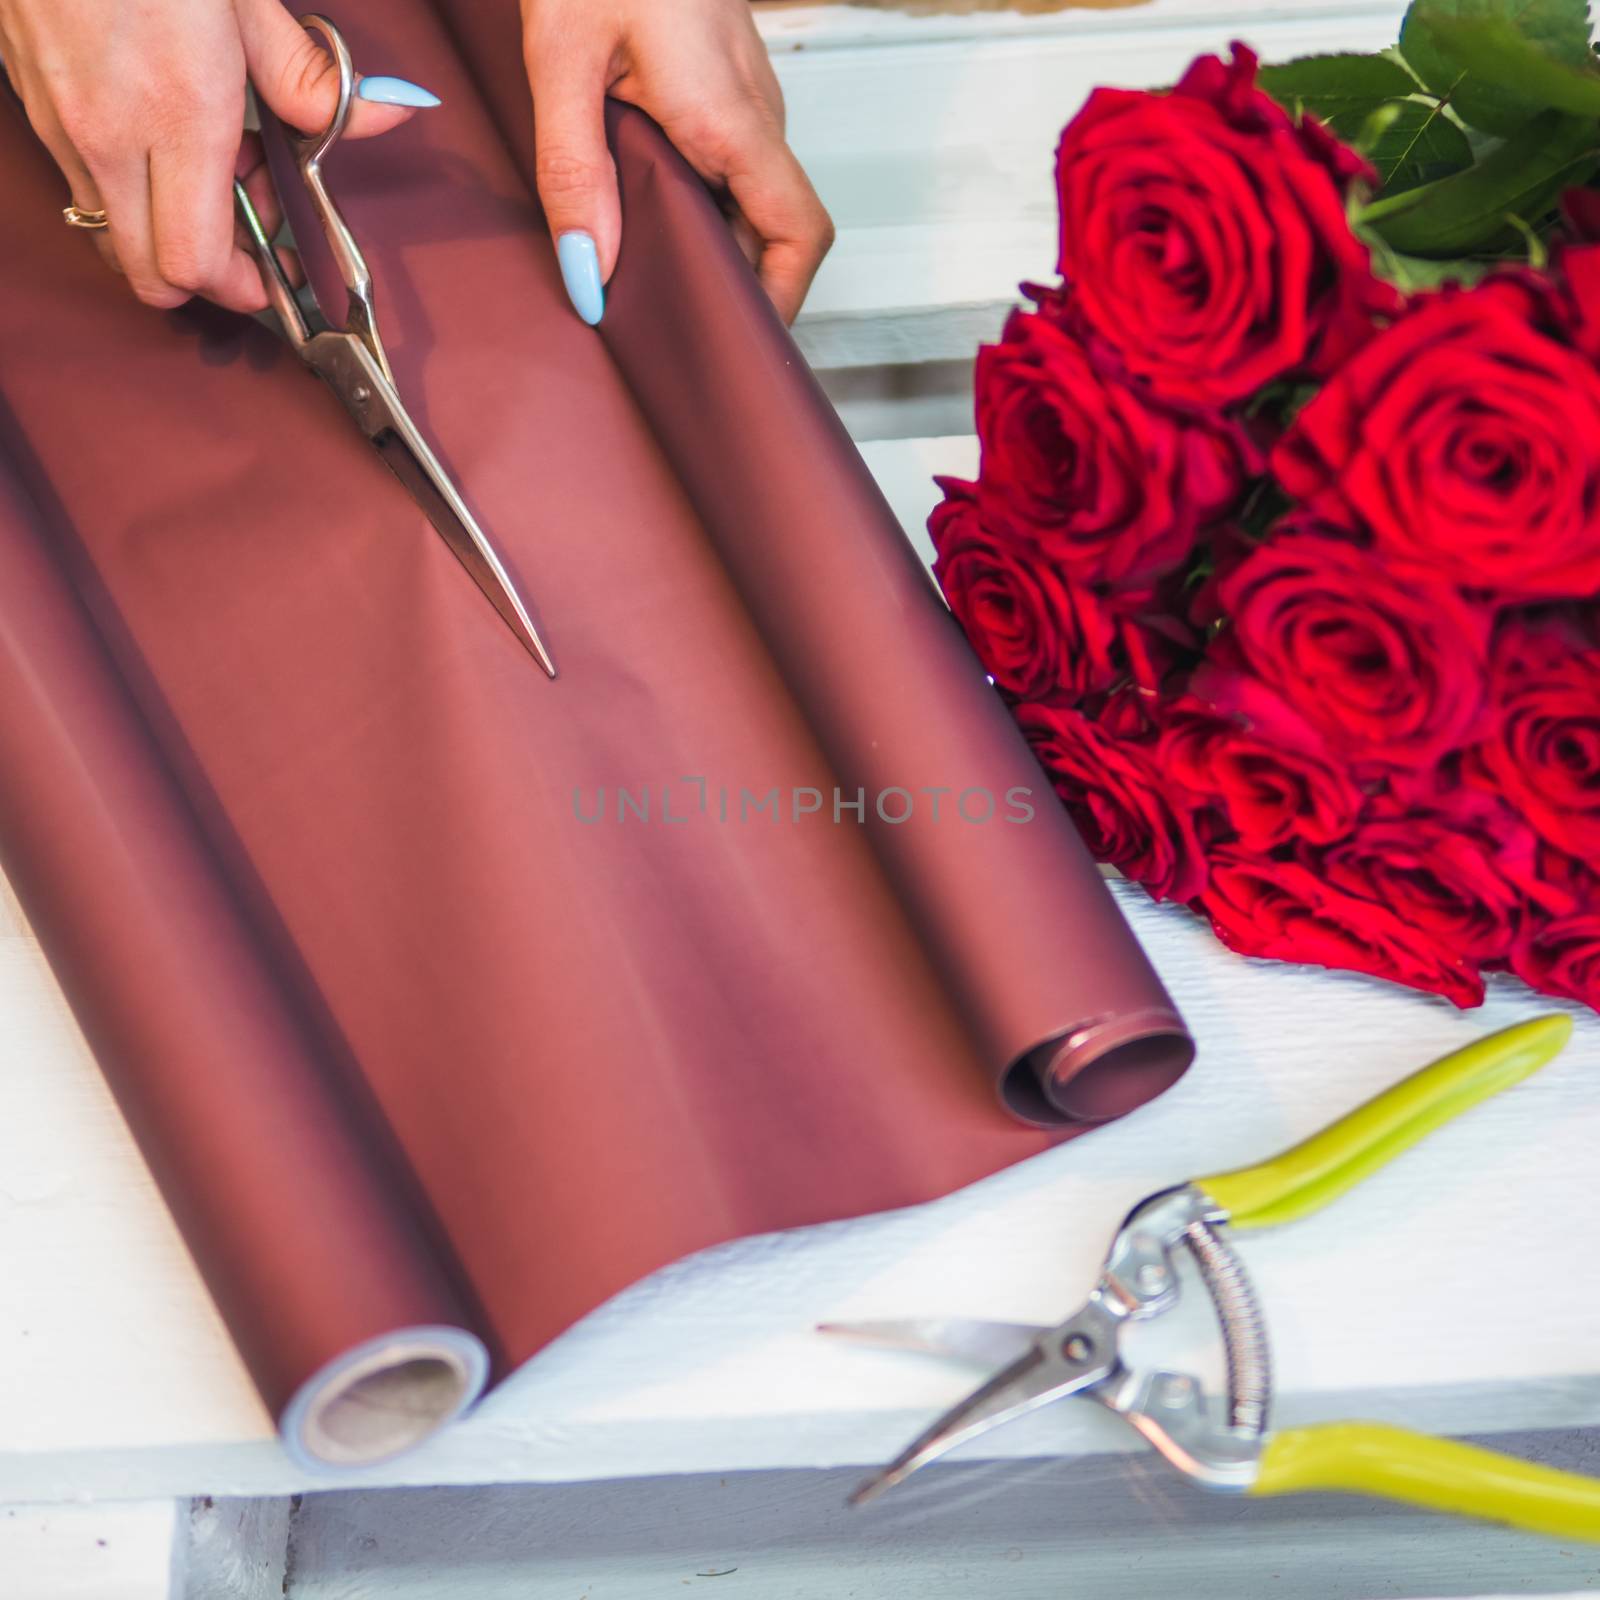 florist hands are cutting wrapping paper with scissors for making bouquet. Florist at work, making red rose bouquet in flower shop. Copy space.